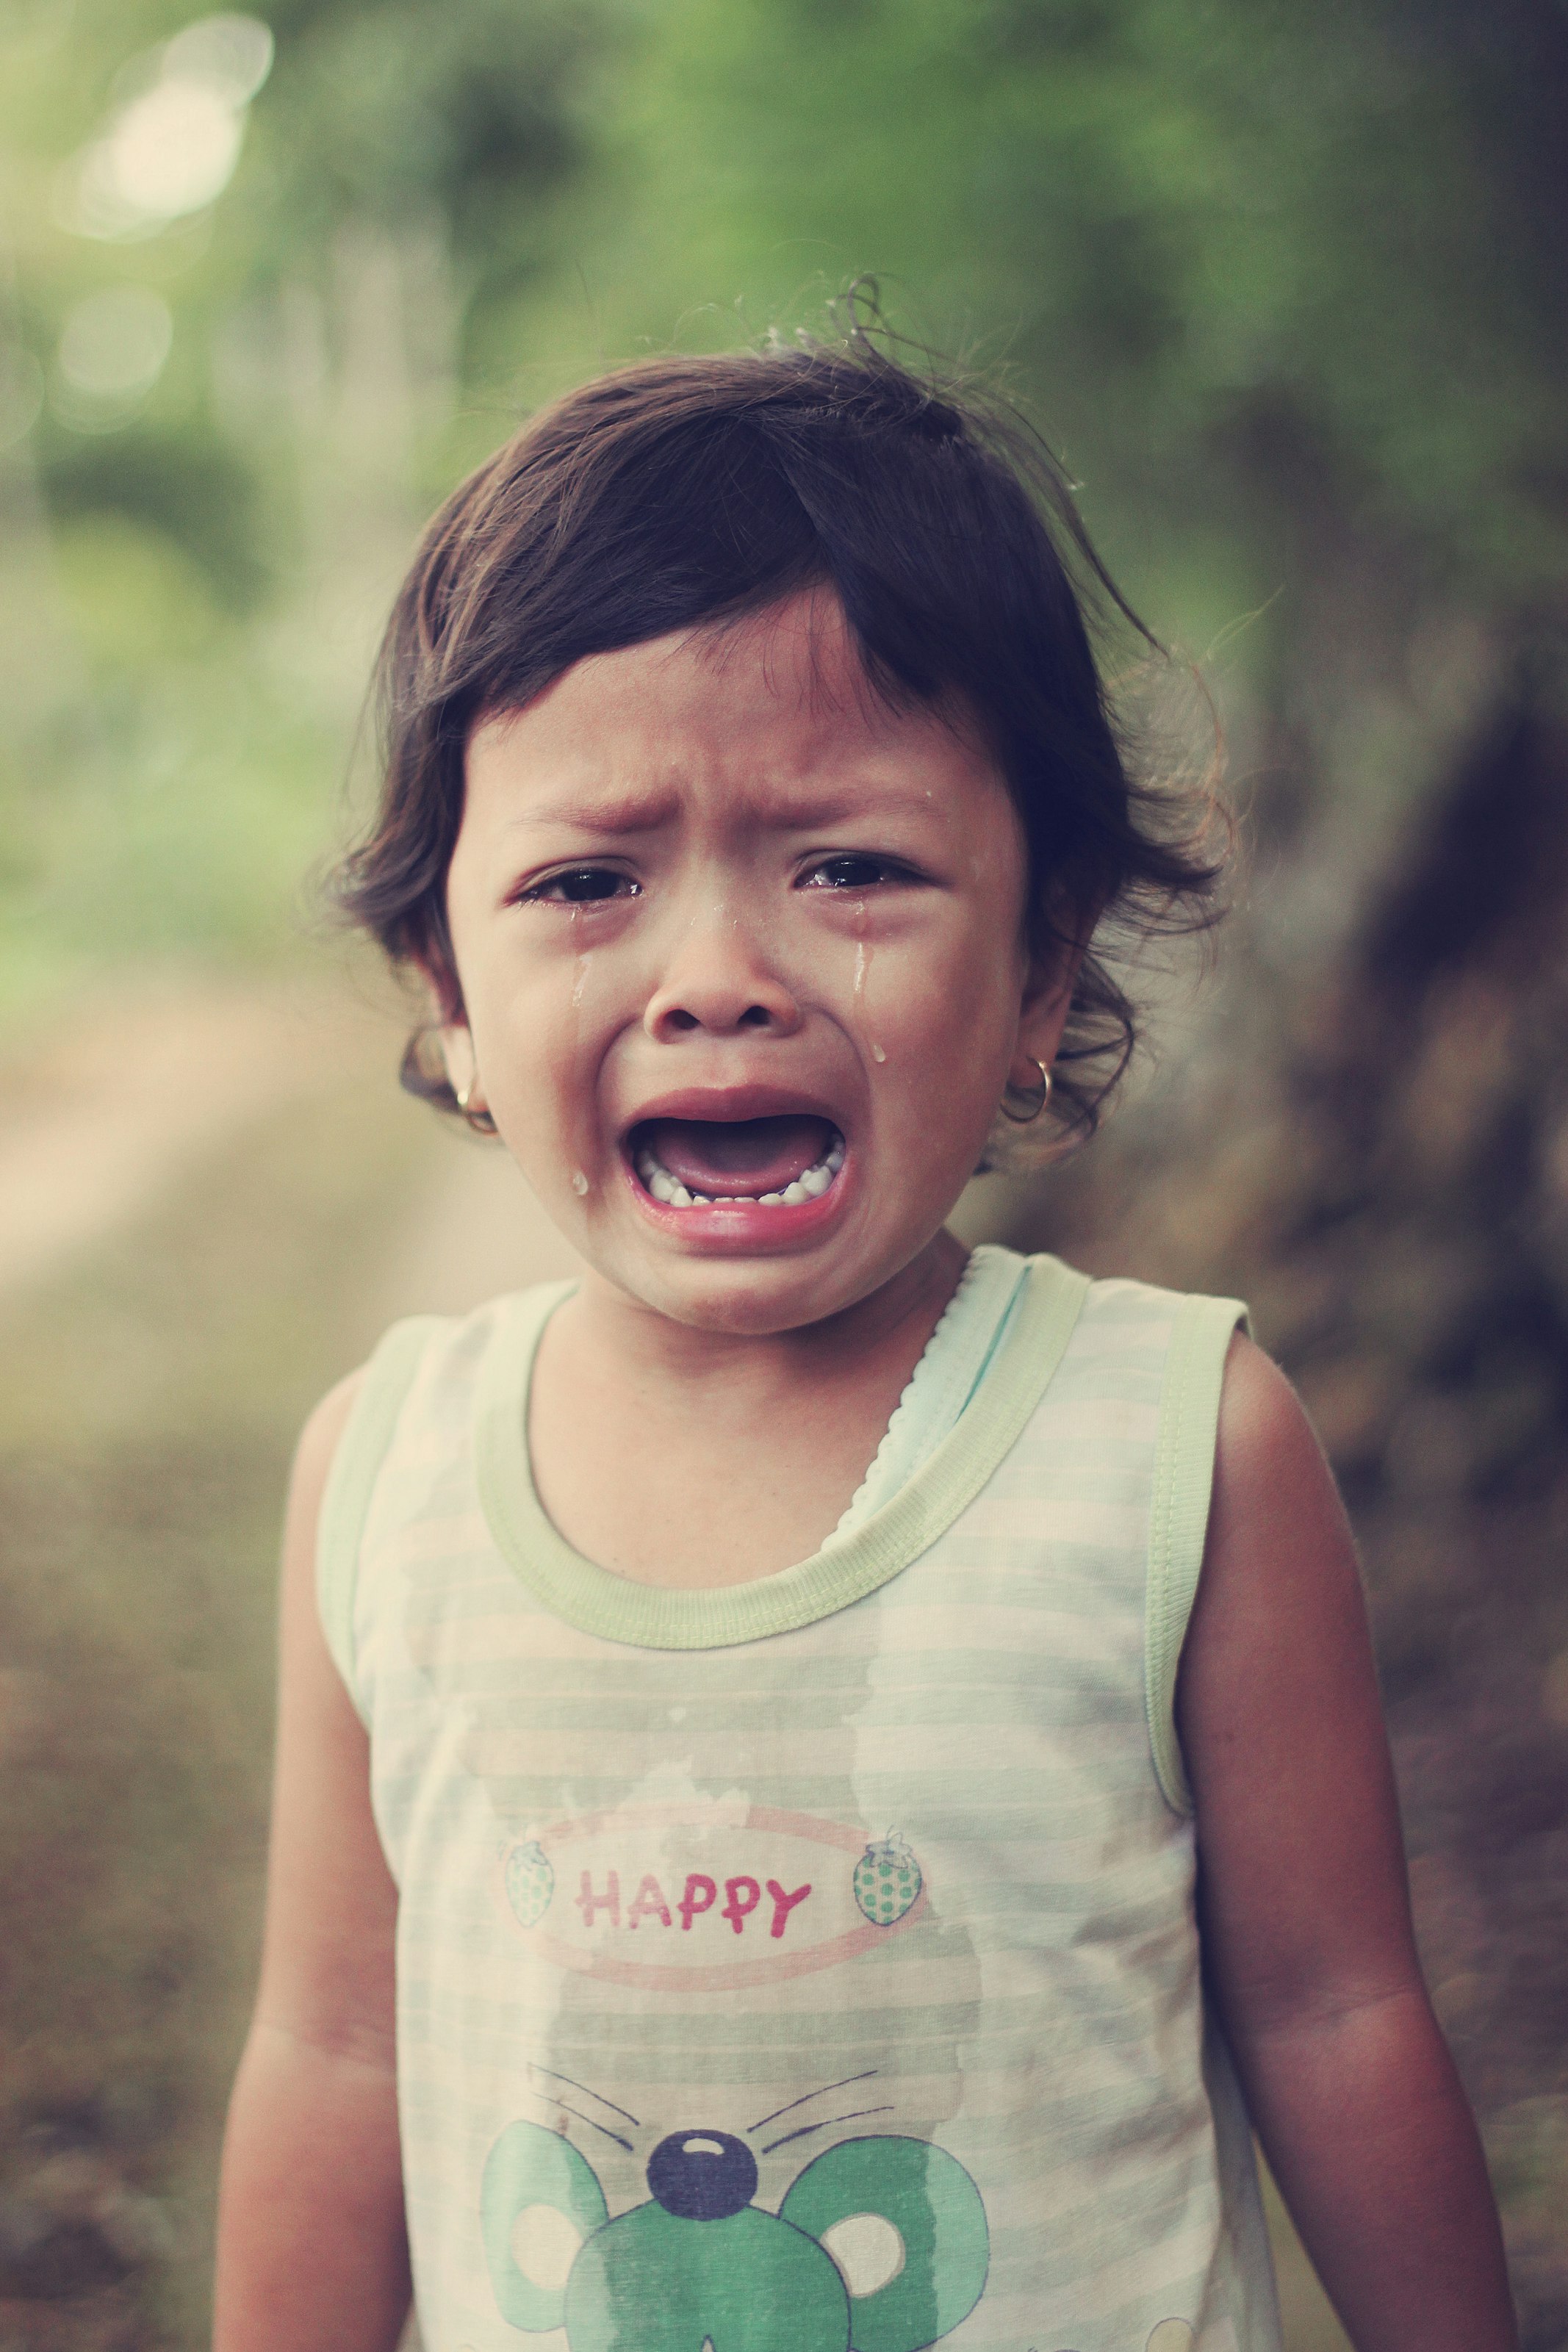 Did young children in previous eras have tantrums like today’s toddlers?